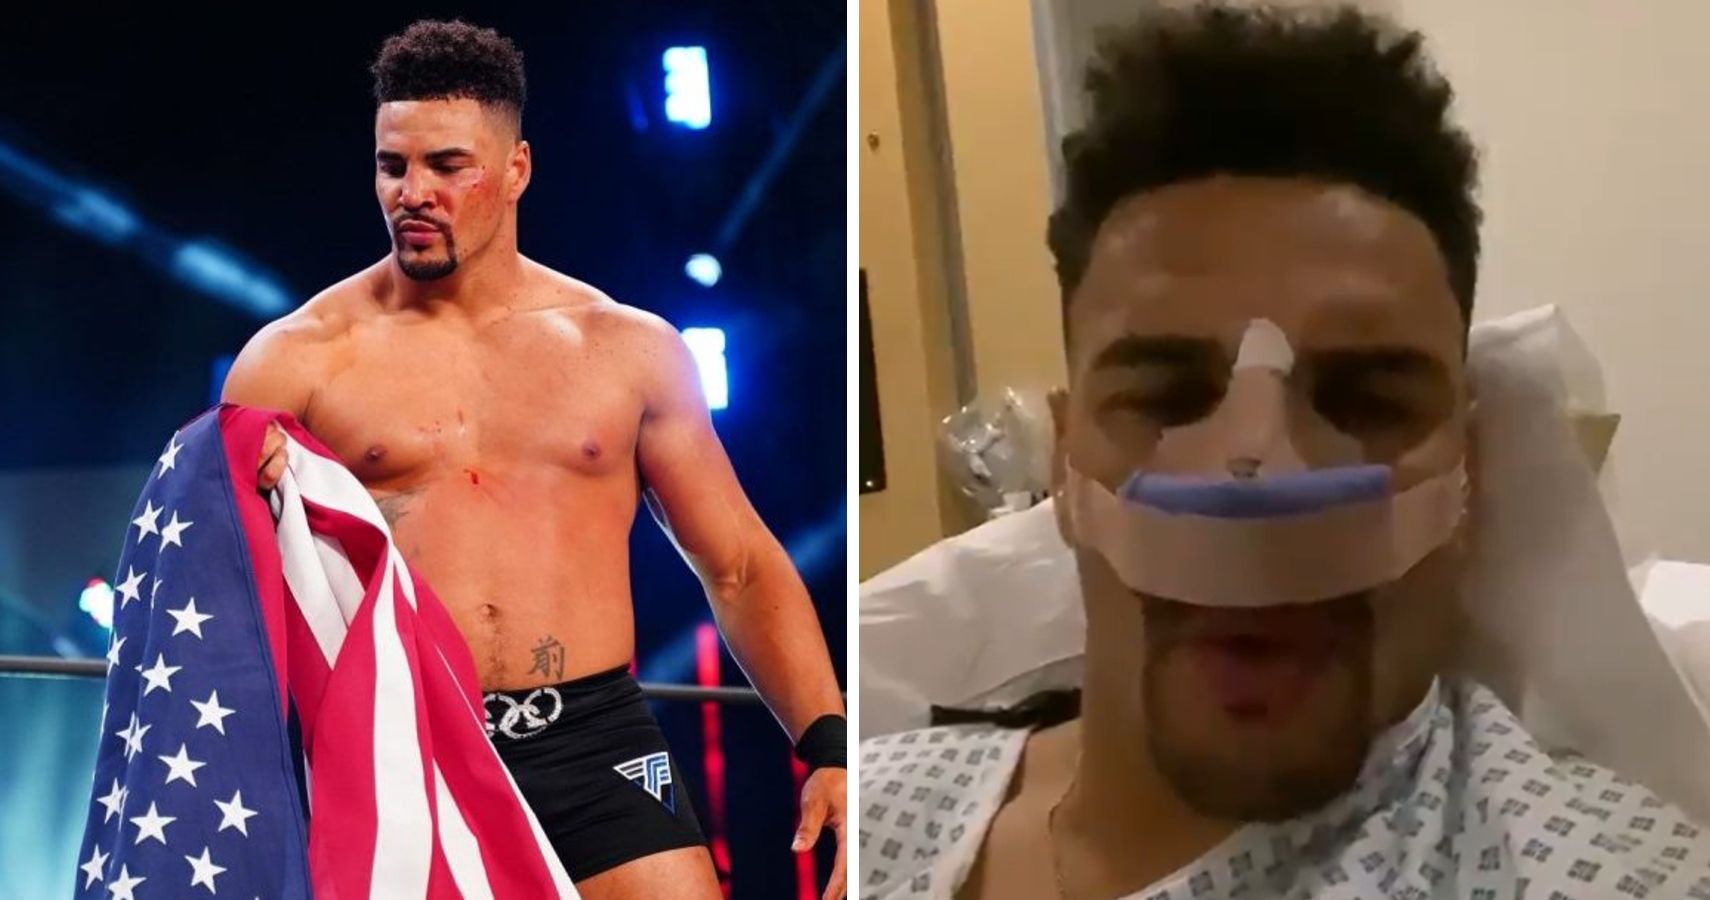 RIGHT: AEW star and former Olympic boxer Anthony Ogogo in AEW // LEFT: Anthony Ogogo after having surgery on his damaged eye